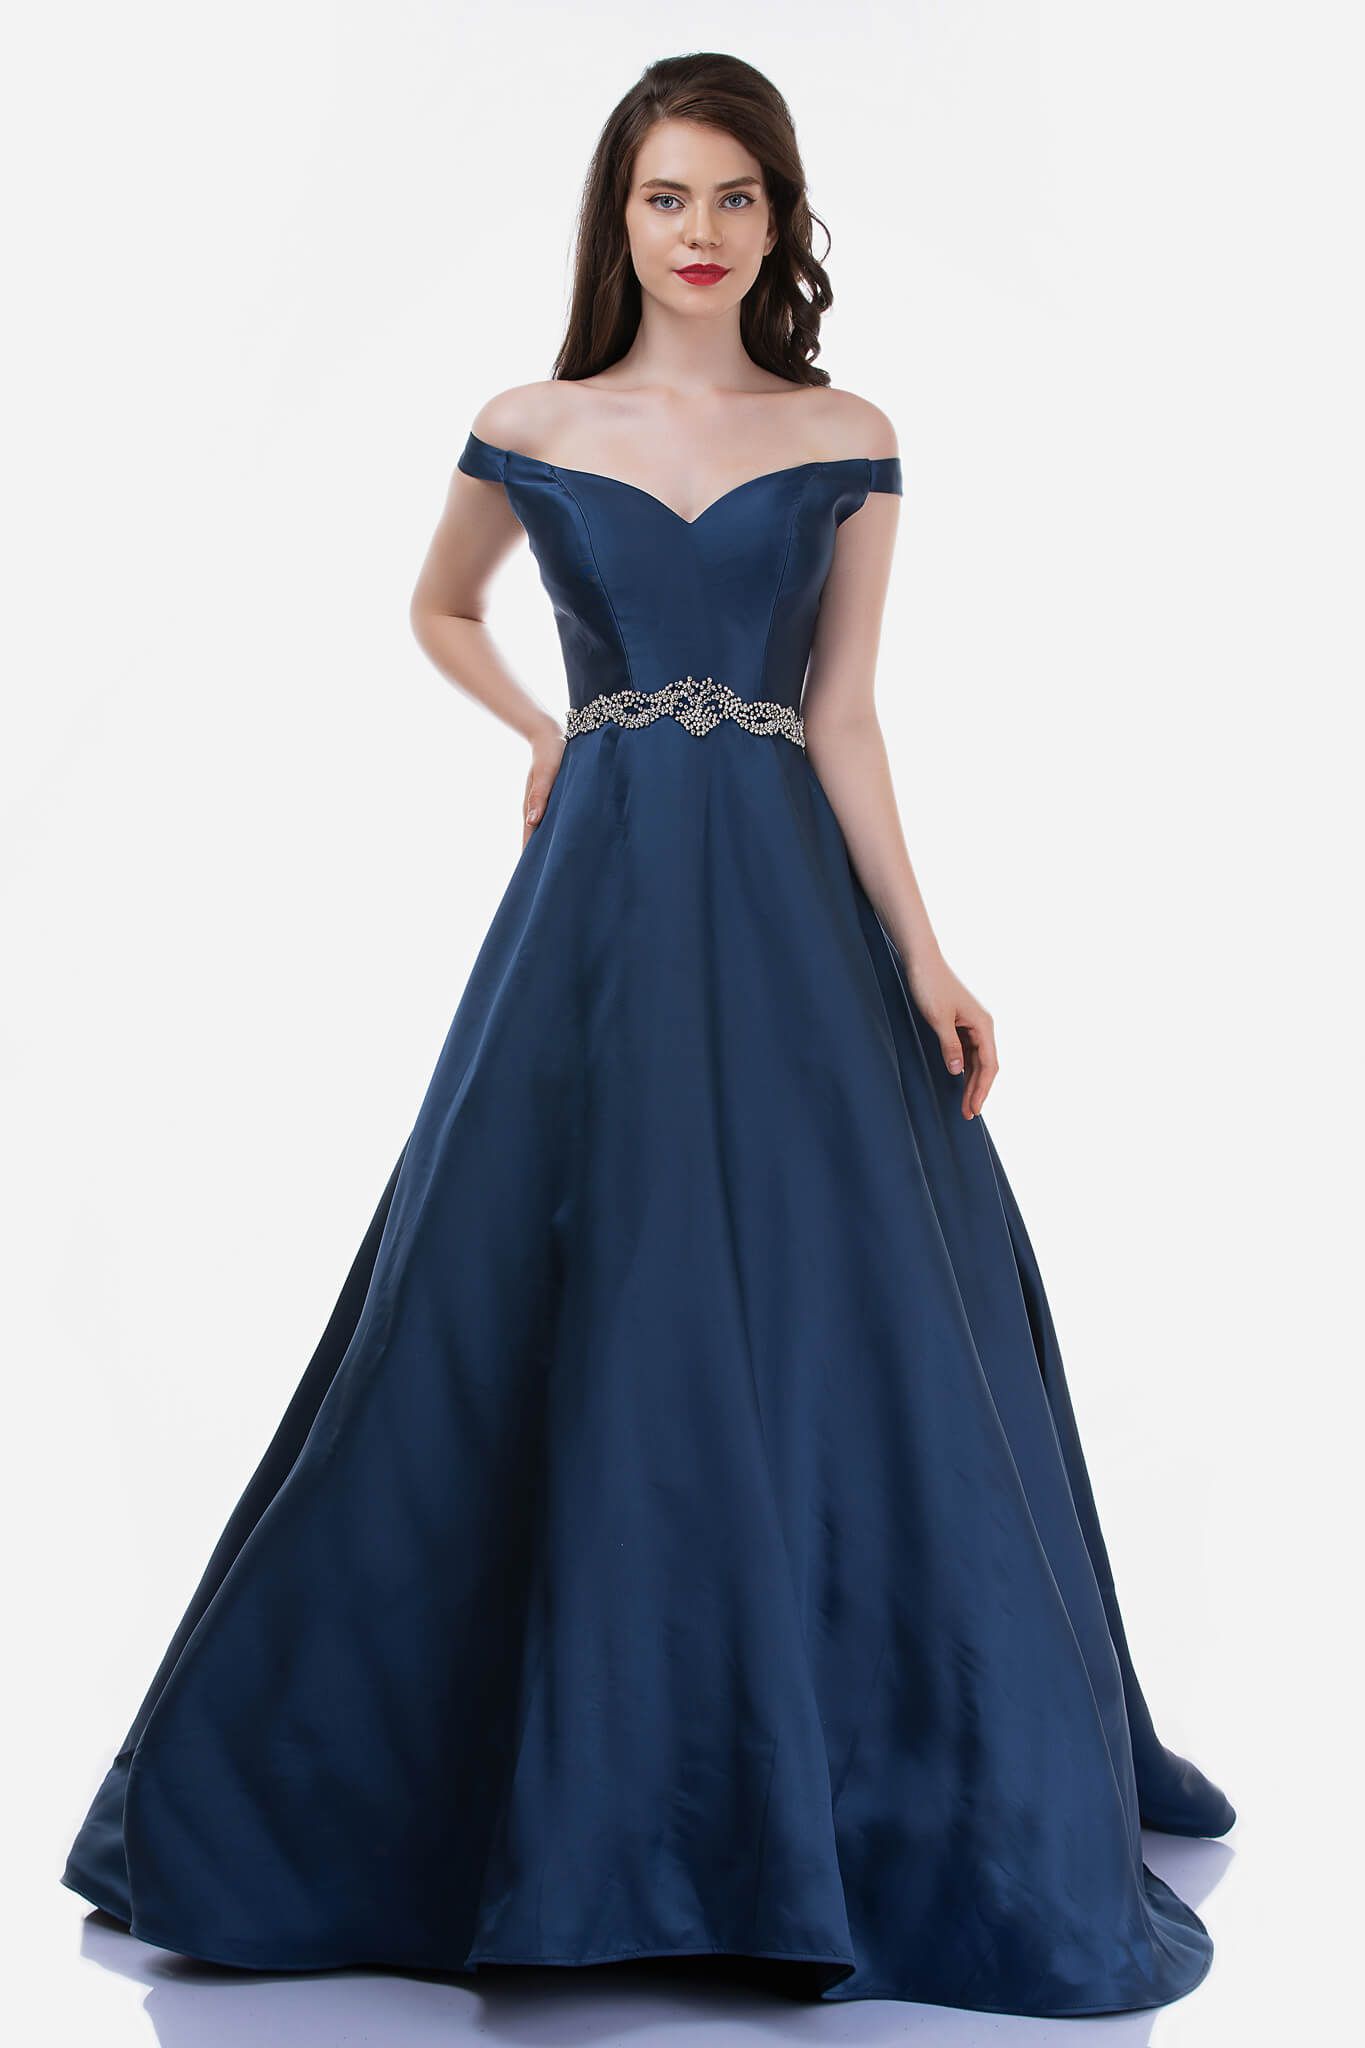 Style 2258 Nina Canacci Size 8 Prom Off The Shoulder Navy Blue Ball Gown on Queenly